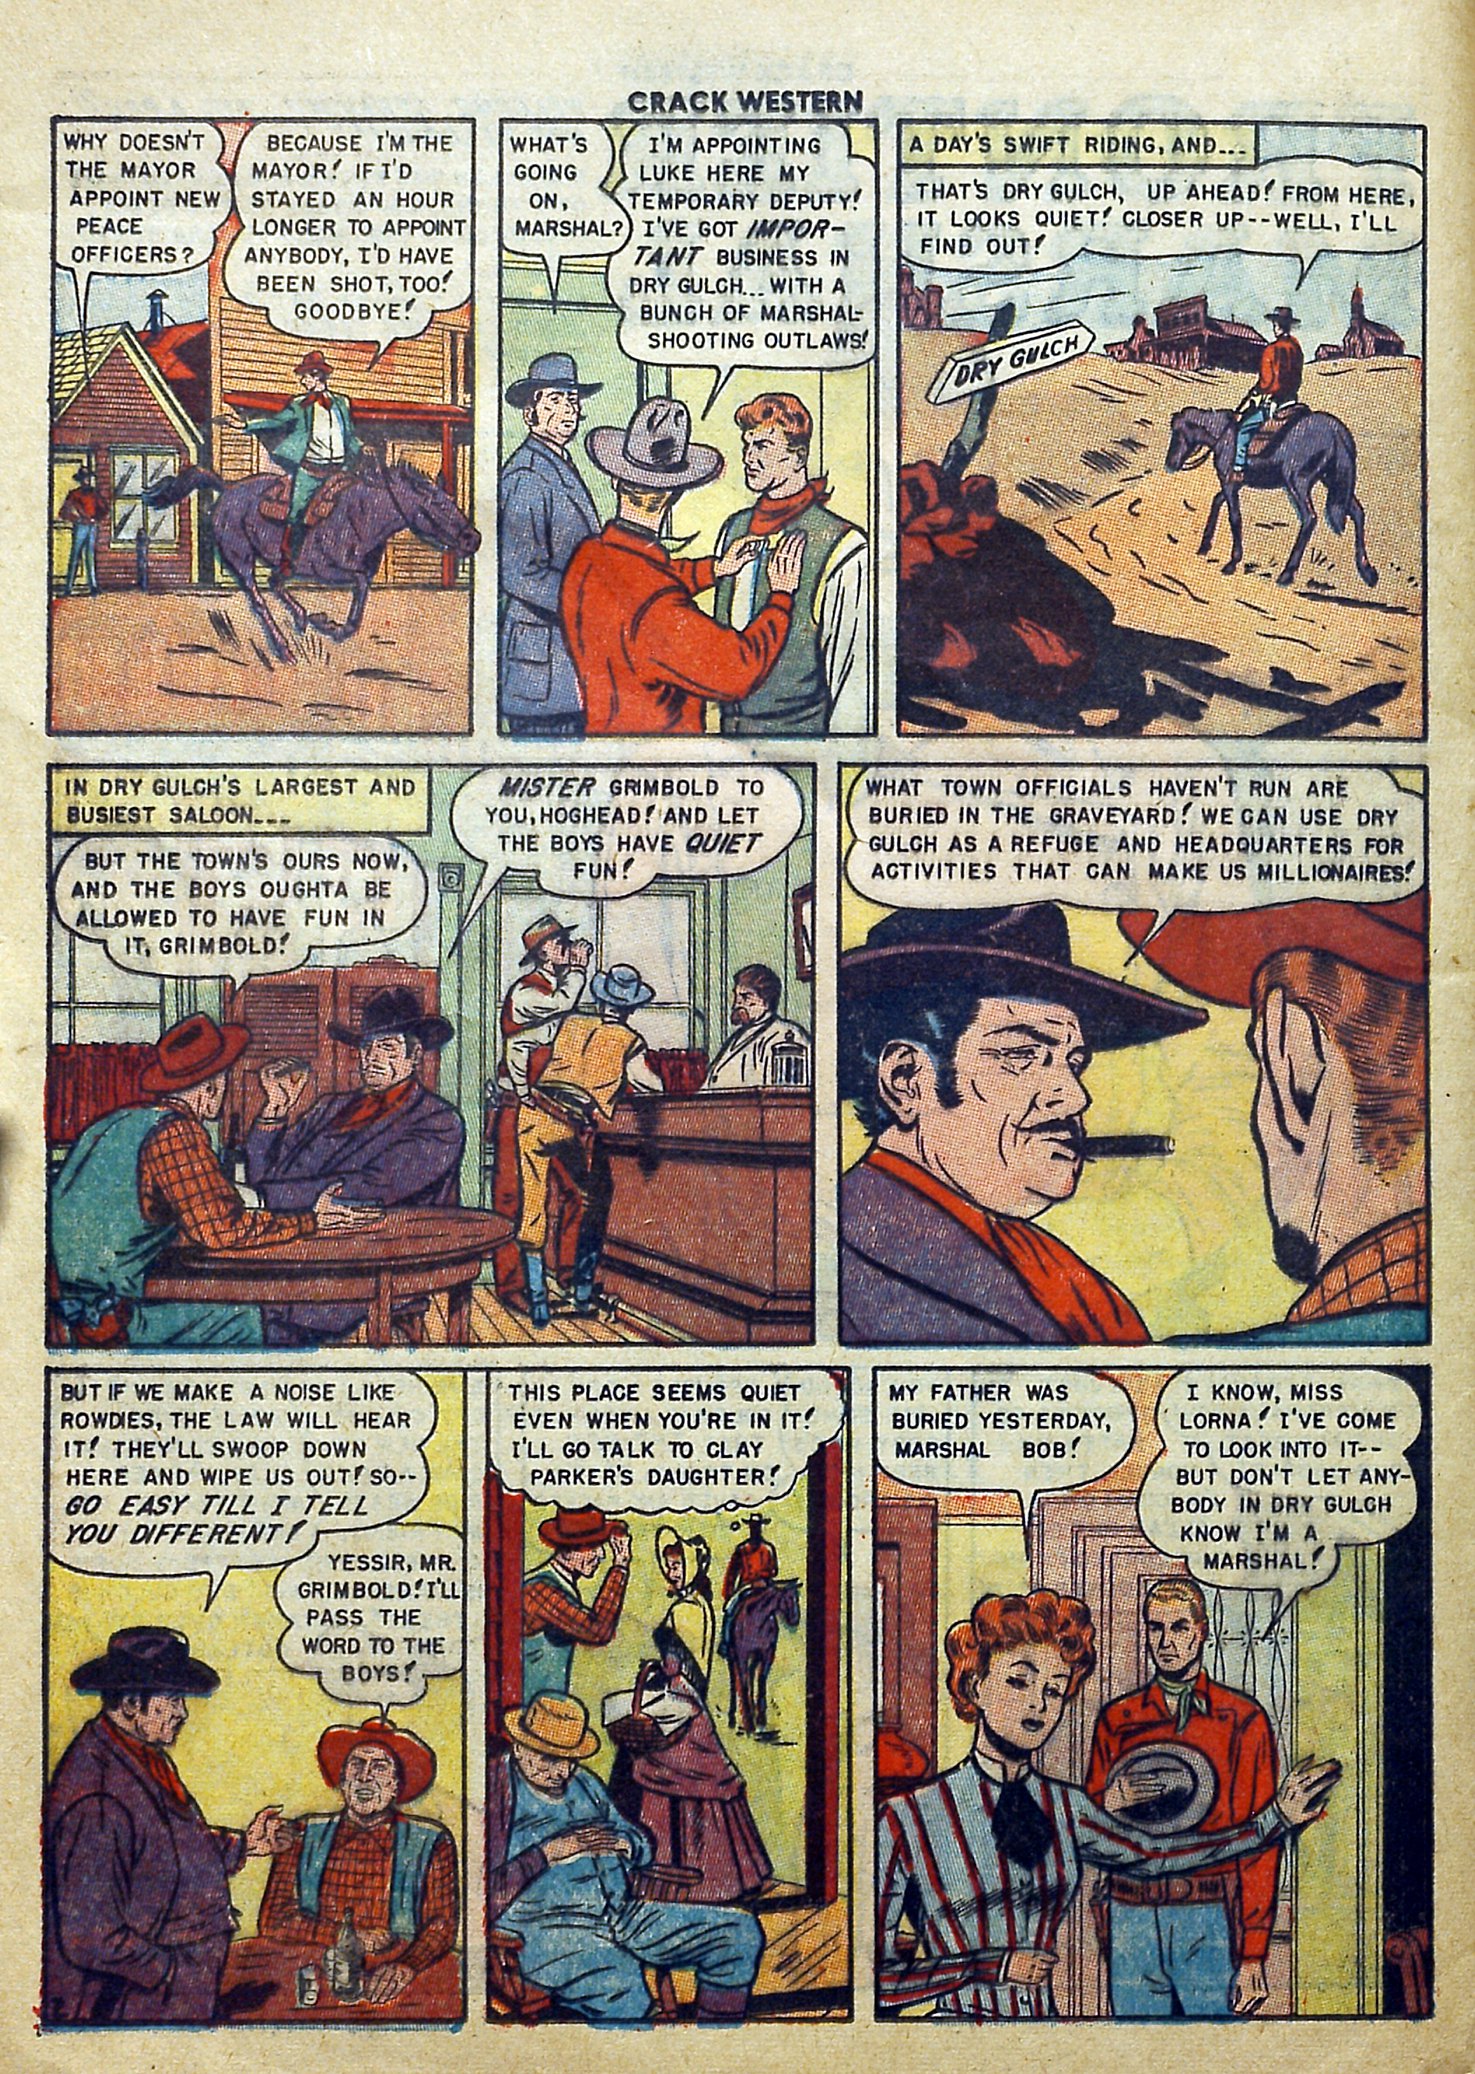 Read online Crack Western comic -  Issue #68 - 28